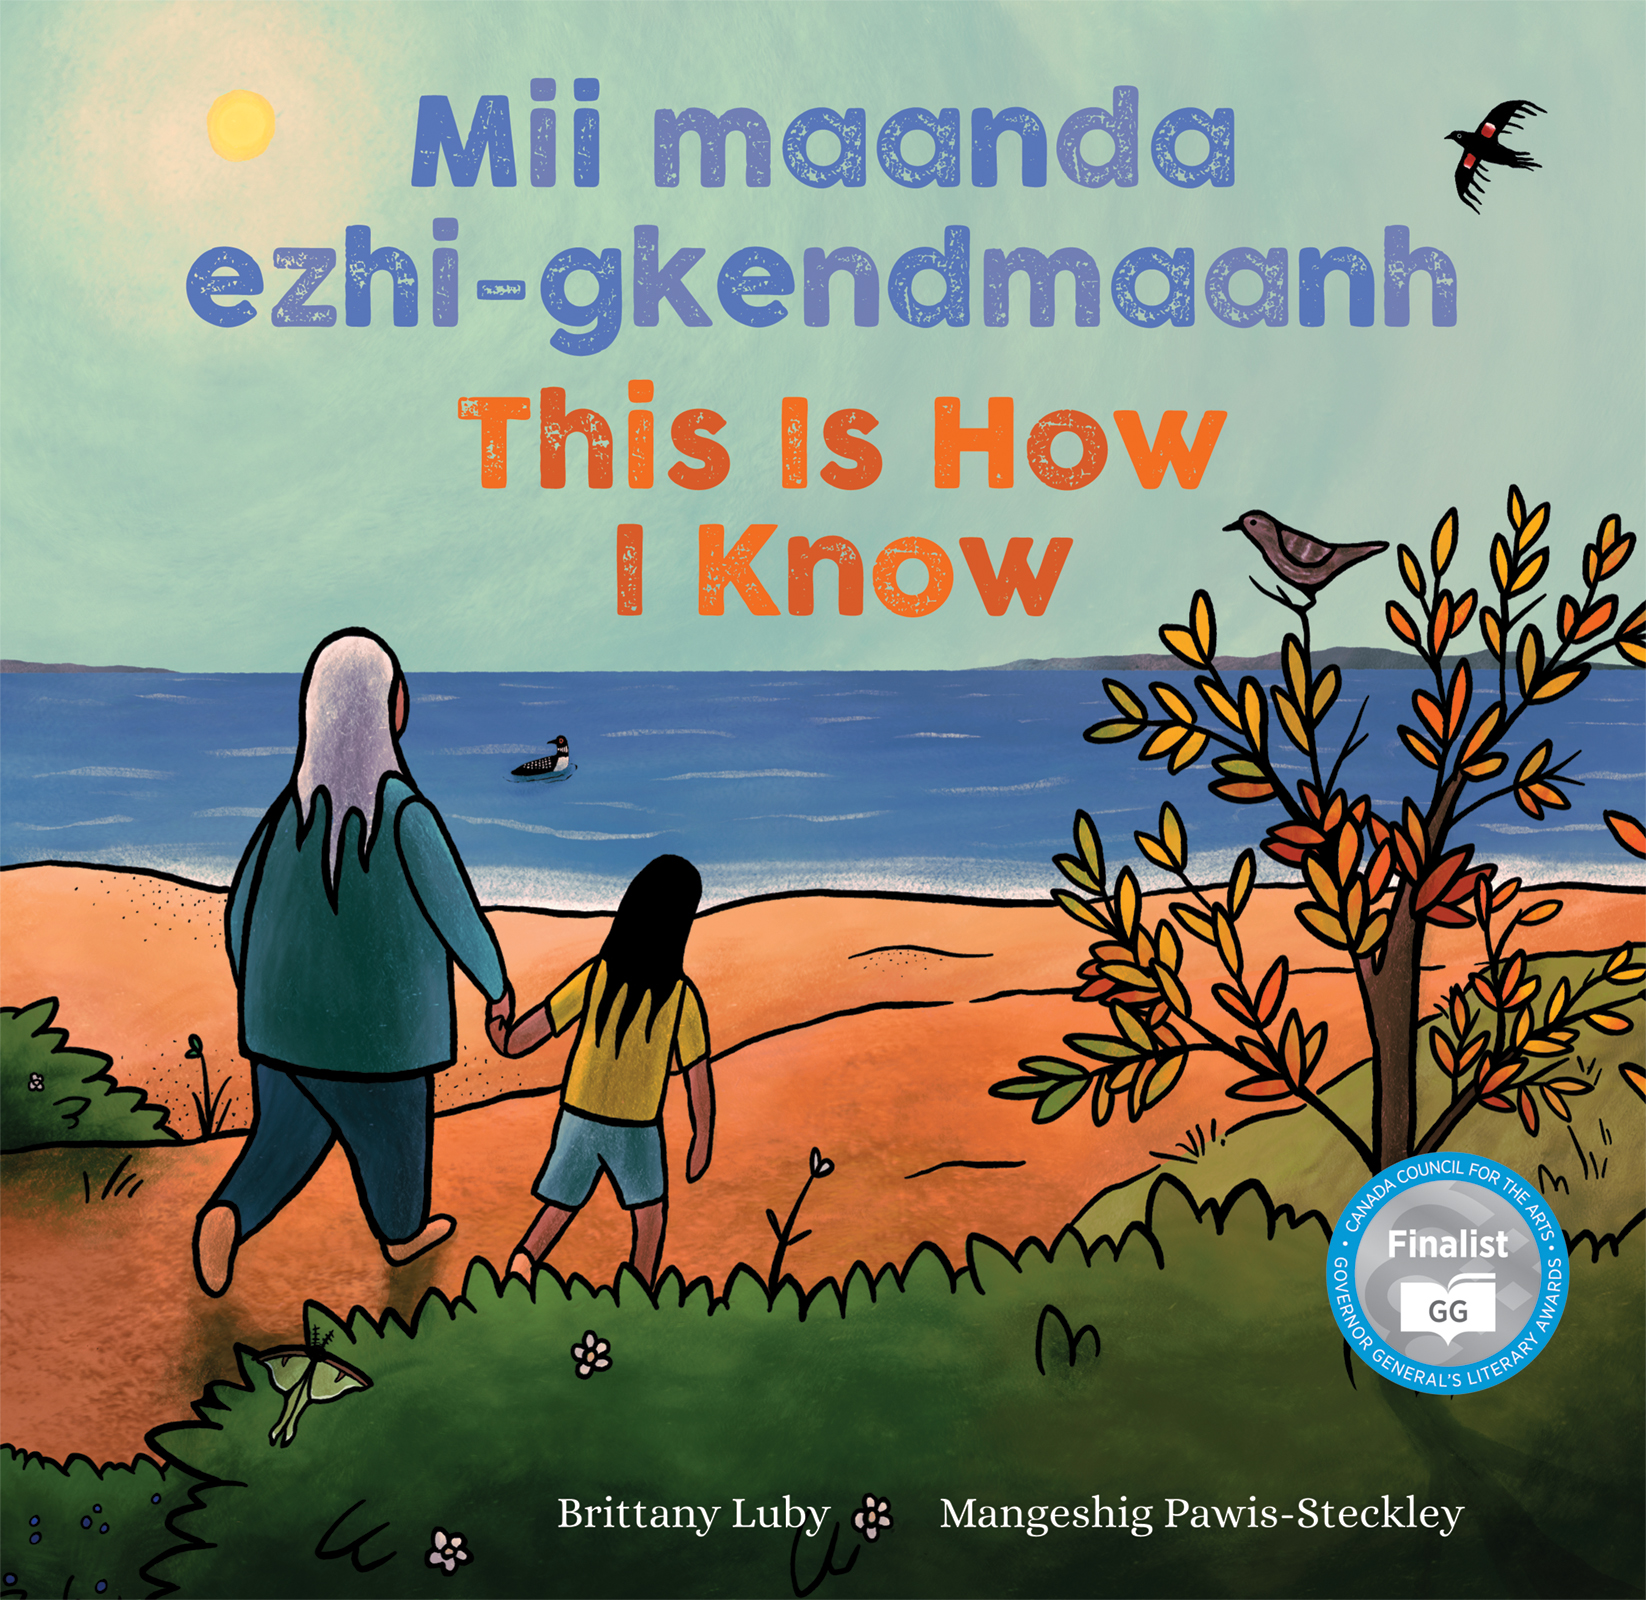 Mii maanda ezhi-gkendmaanh / This Is How I Know by Brittany Luby